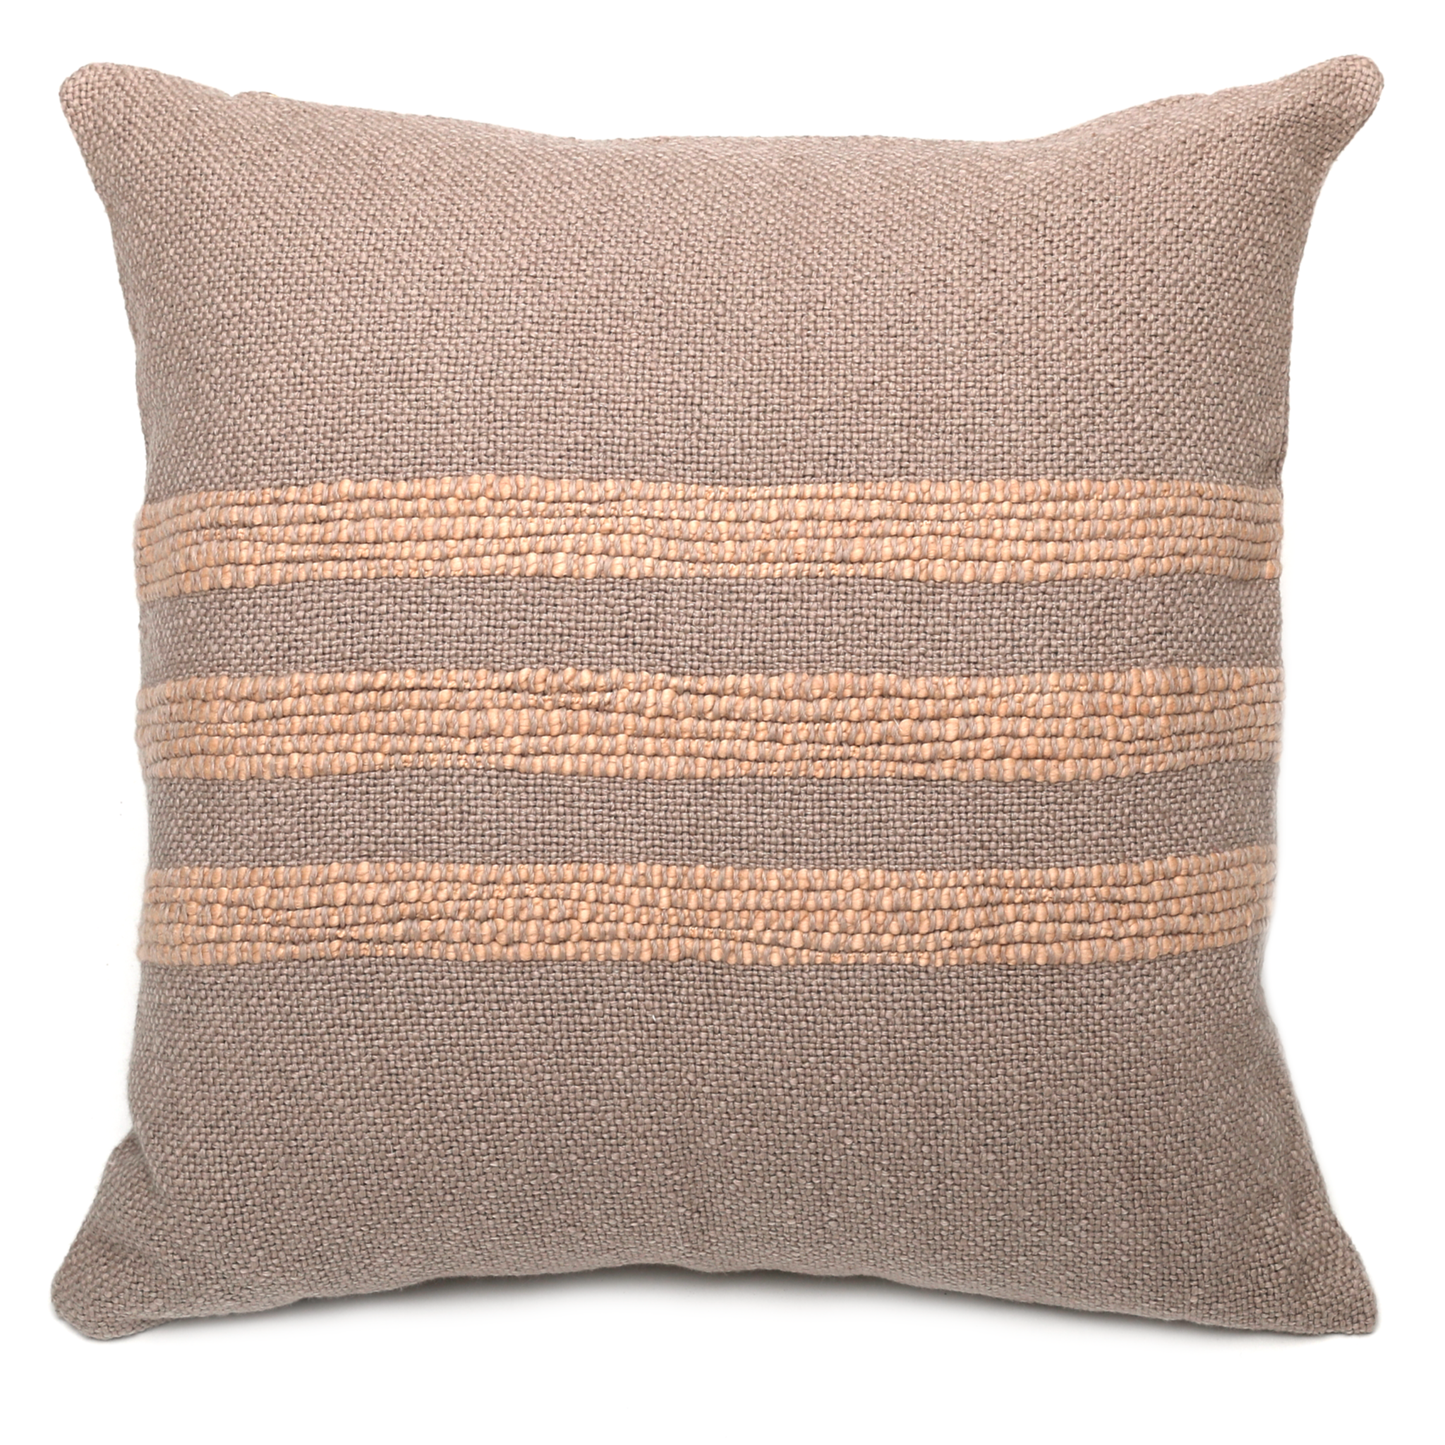 Intiearth Caral Collection Cotton decorative square pillow in taupe with terracotta stripes